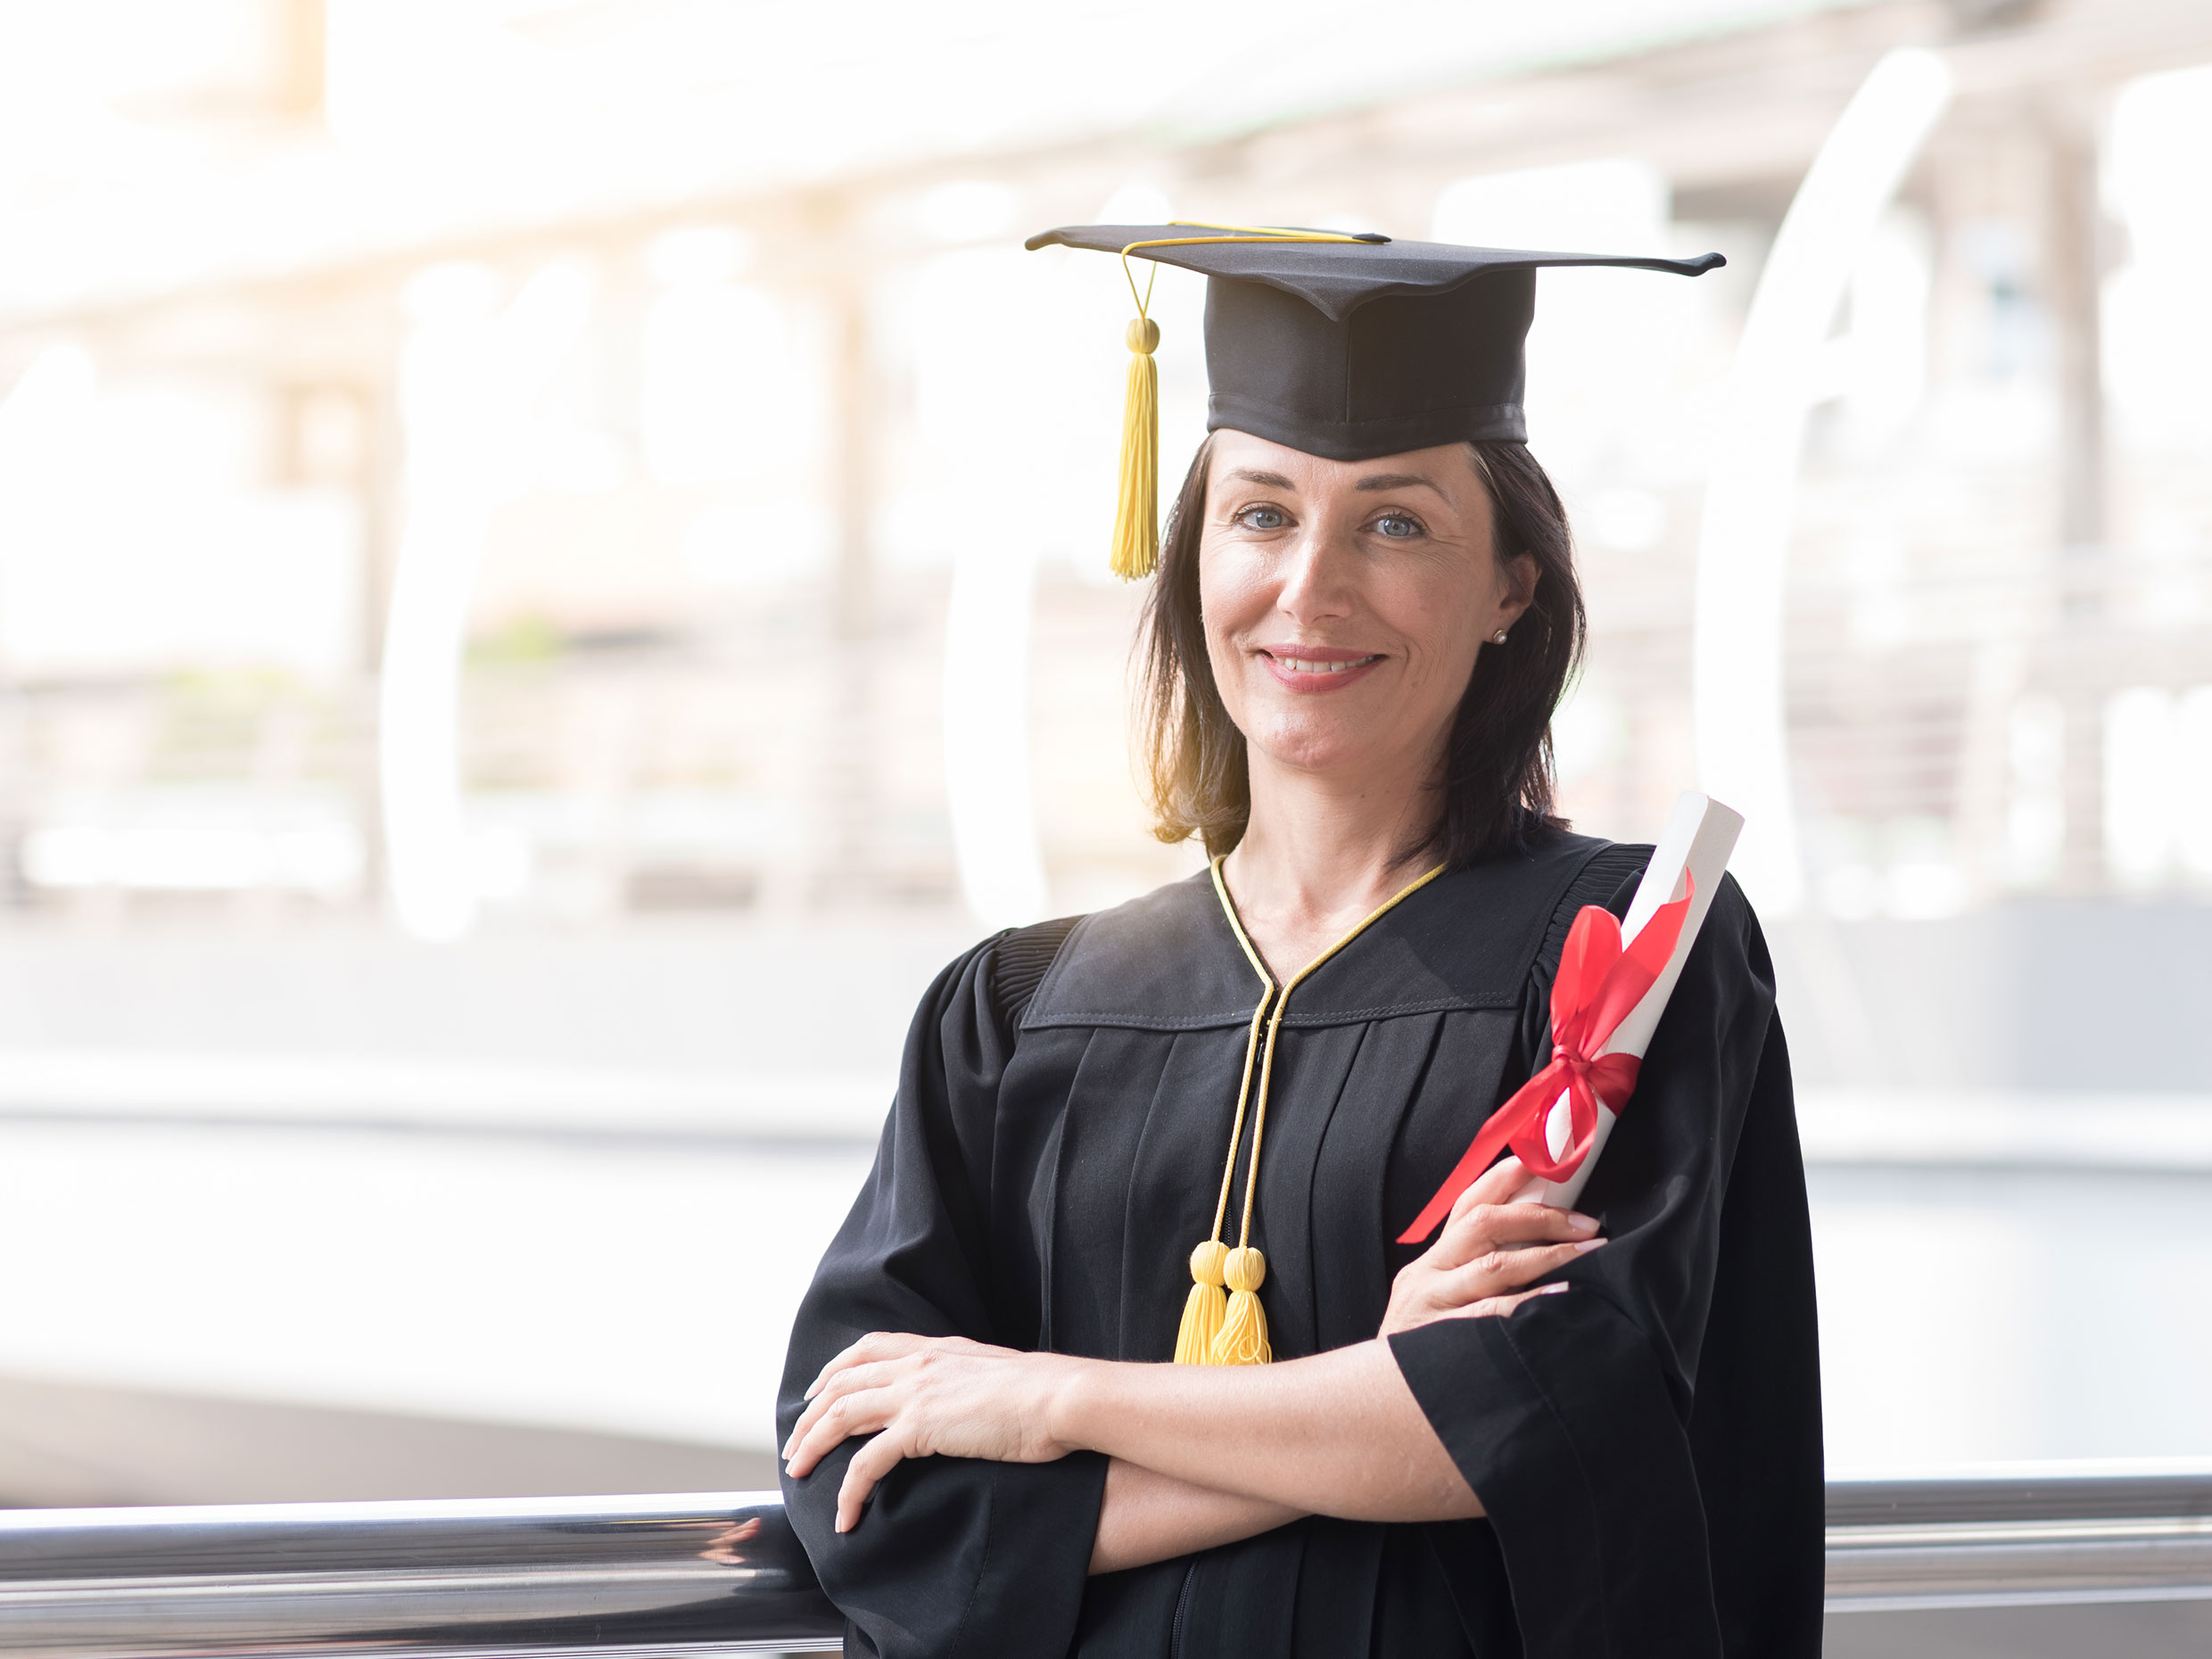 career college graduand smiling in graduation gown and graduation cap while holding a career college diploma